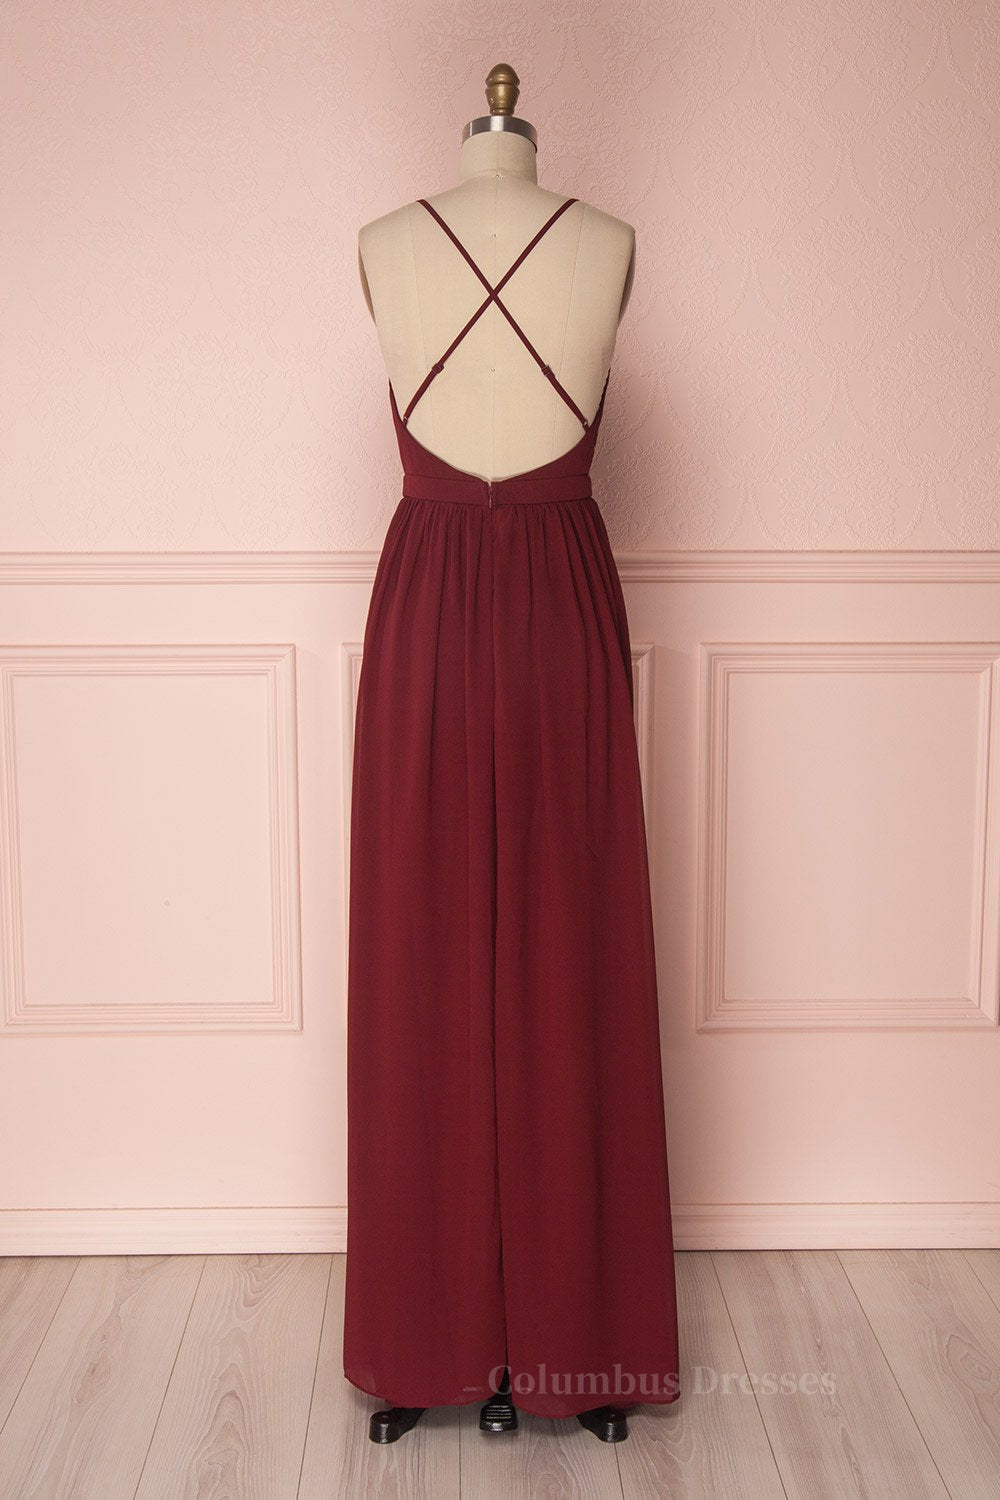 Prom Dresses For Blondes, Simple burgundy chiffon long prom dress burgundy formal dress